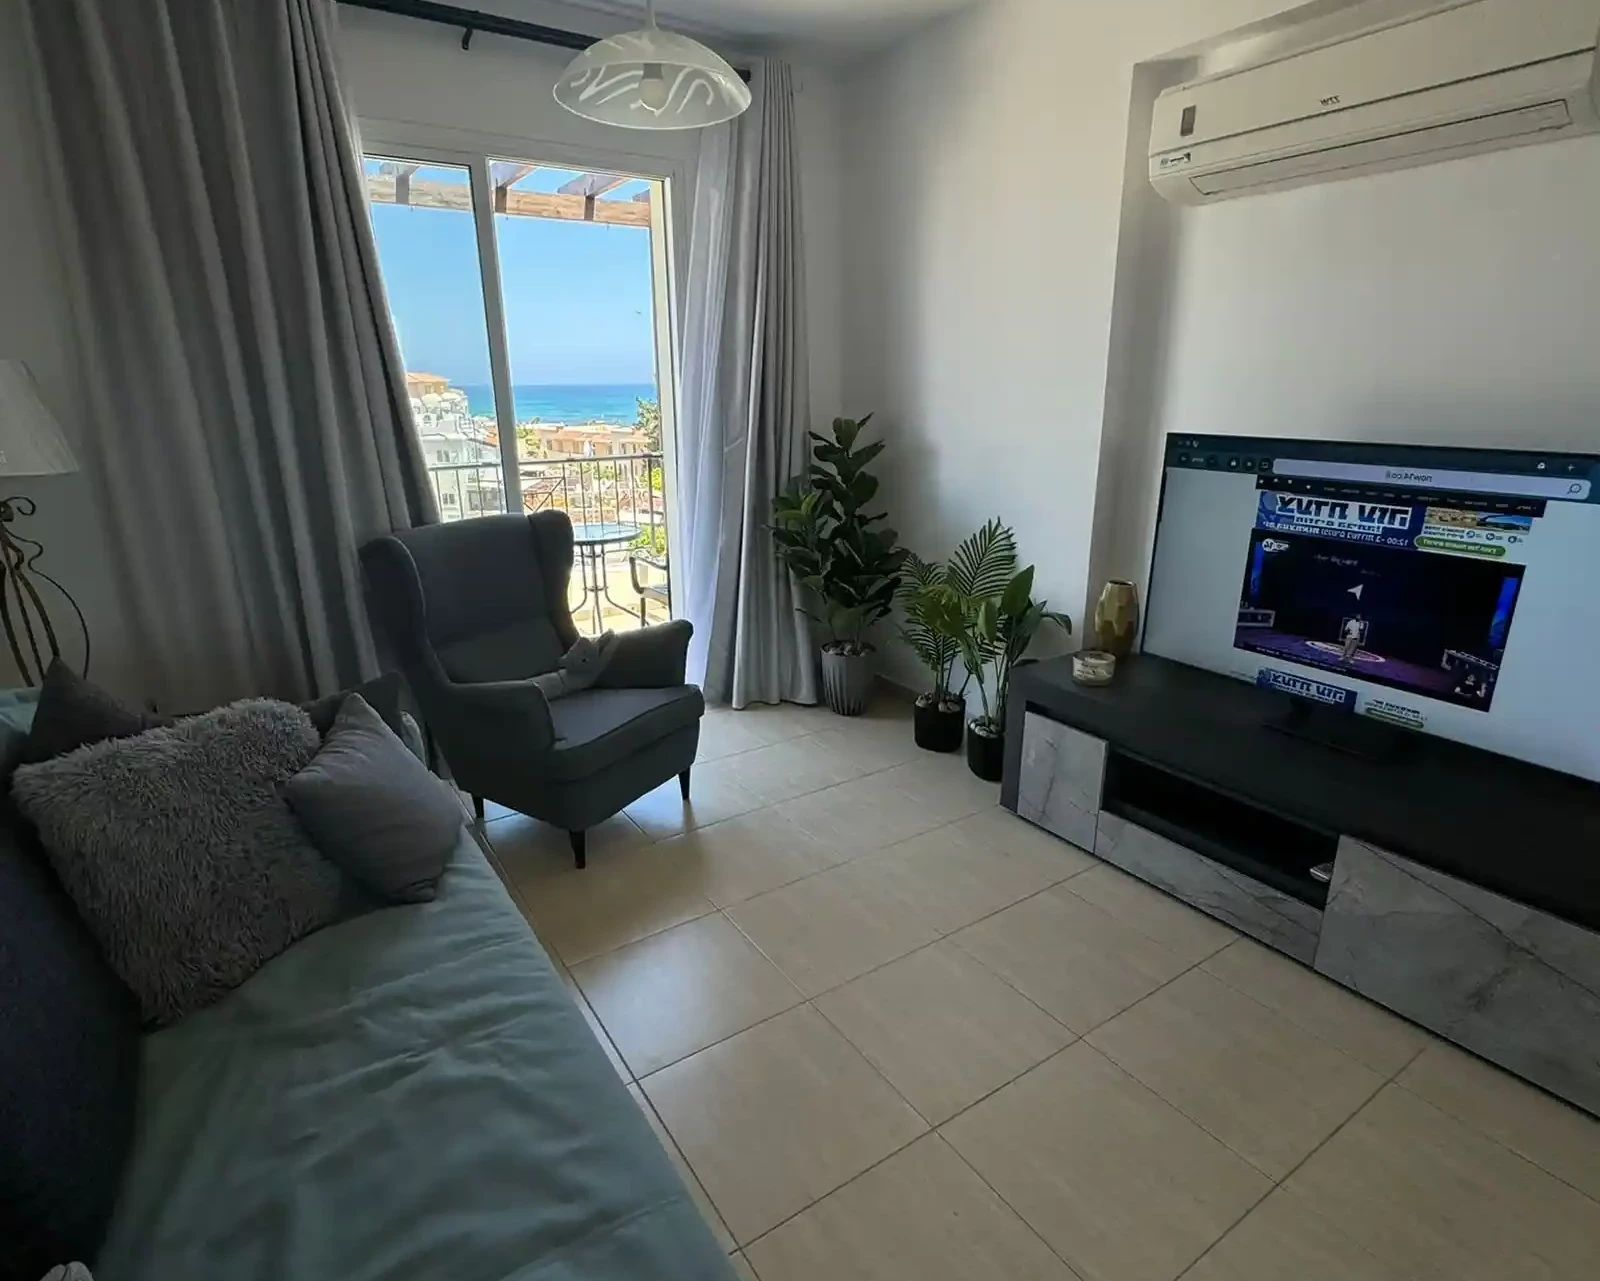 3-bedroom penthouse to rent €1.800, image 1